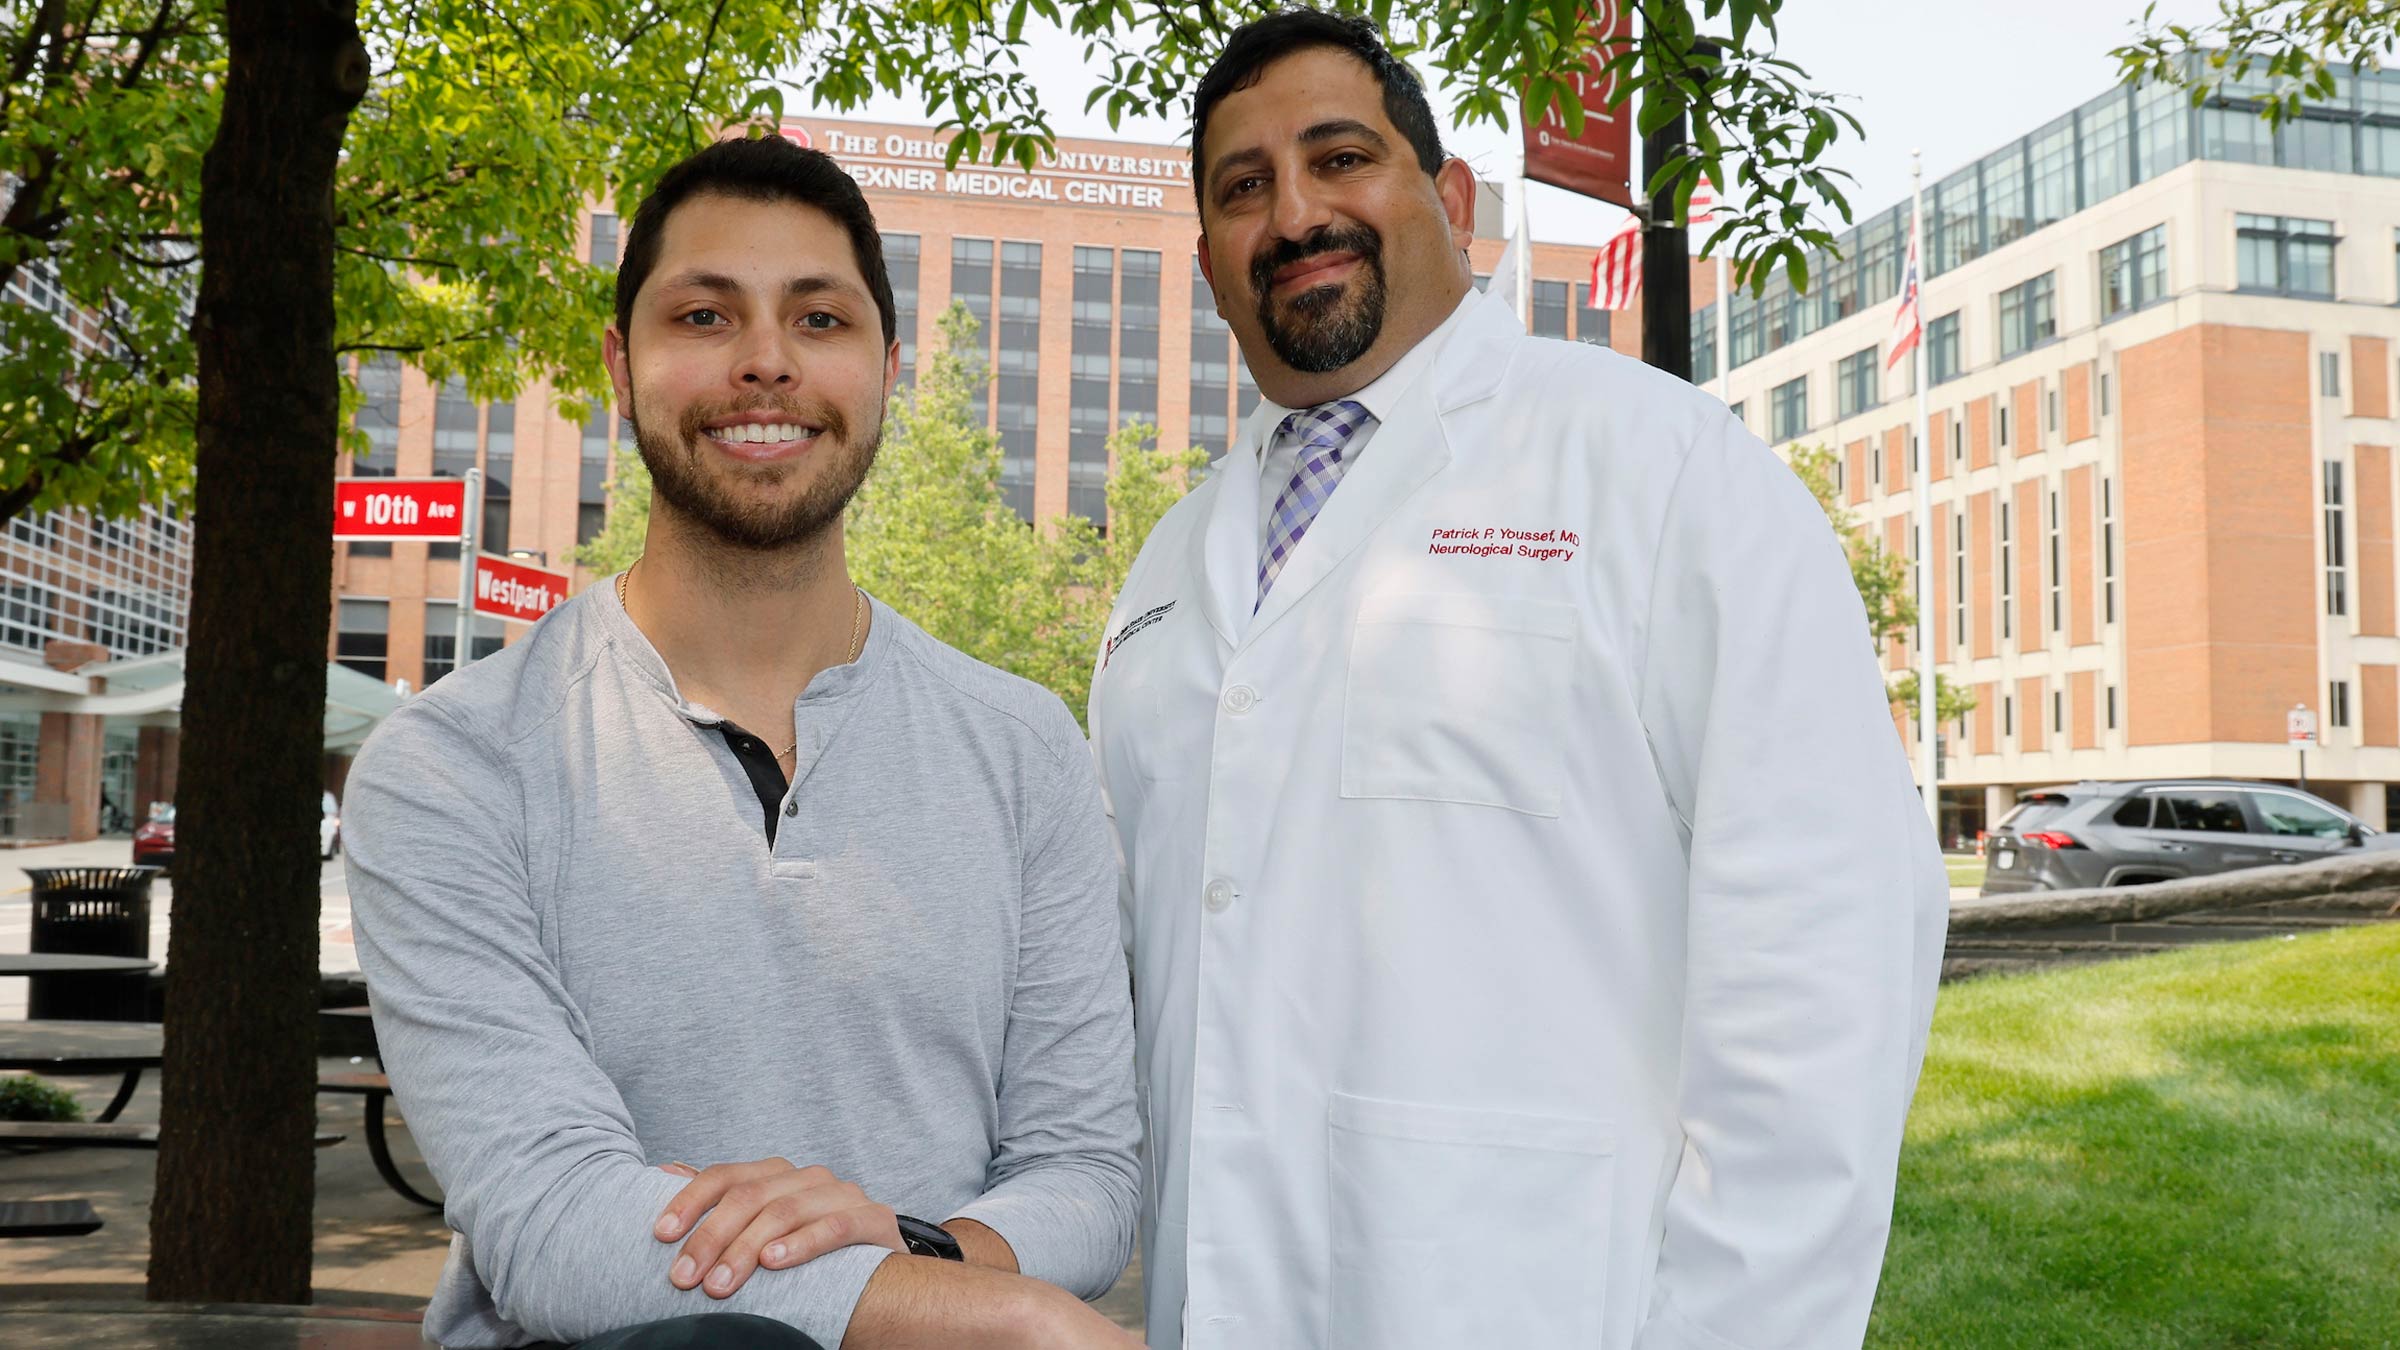 Stephen Vidman, stroke patient, with his vascular neurosurgeon, Patrick Youssef in front of the Wexner Medical Center